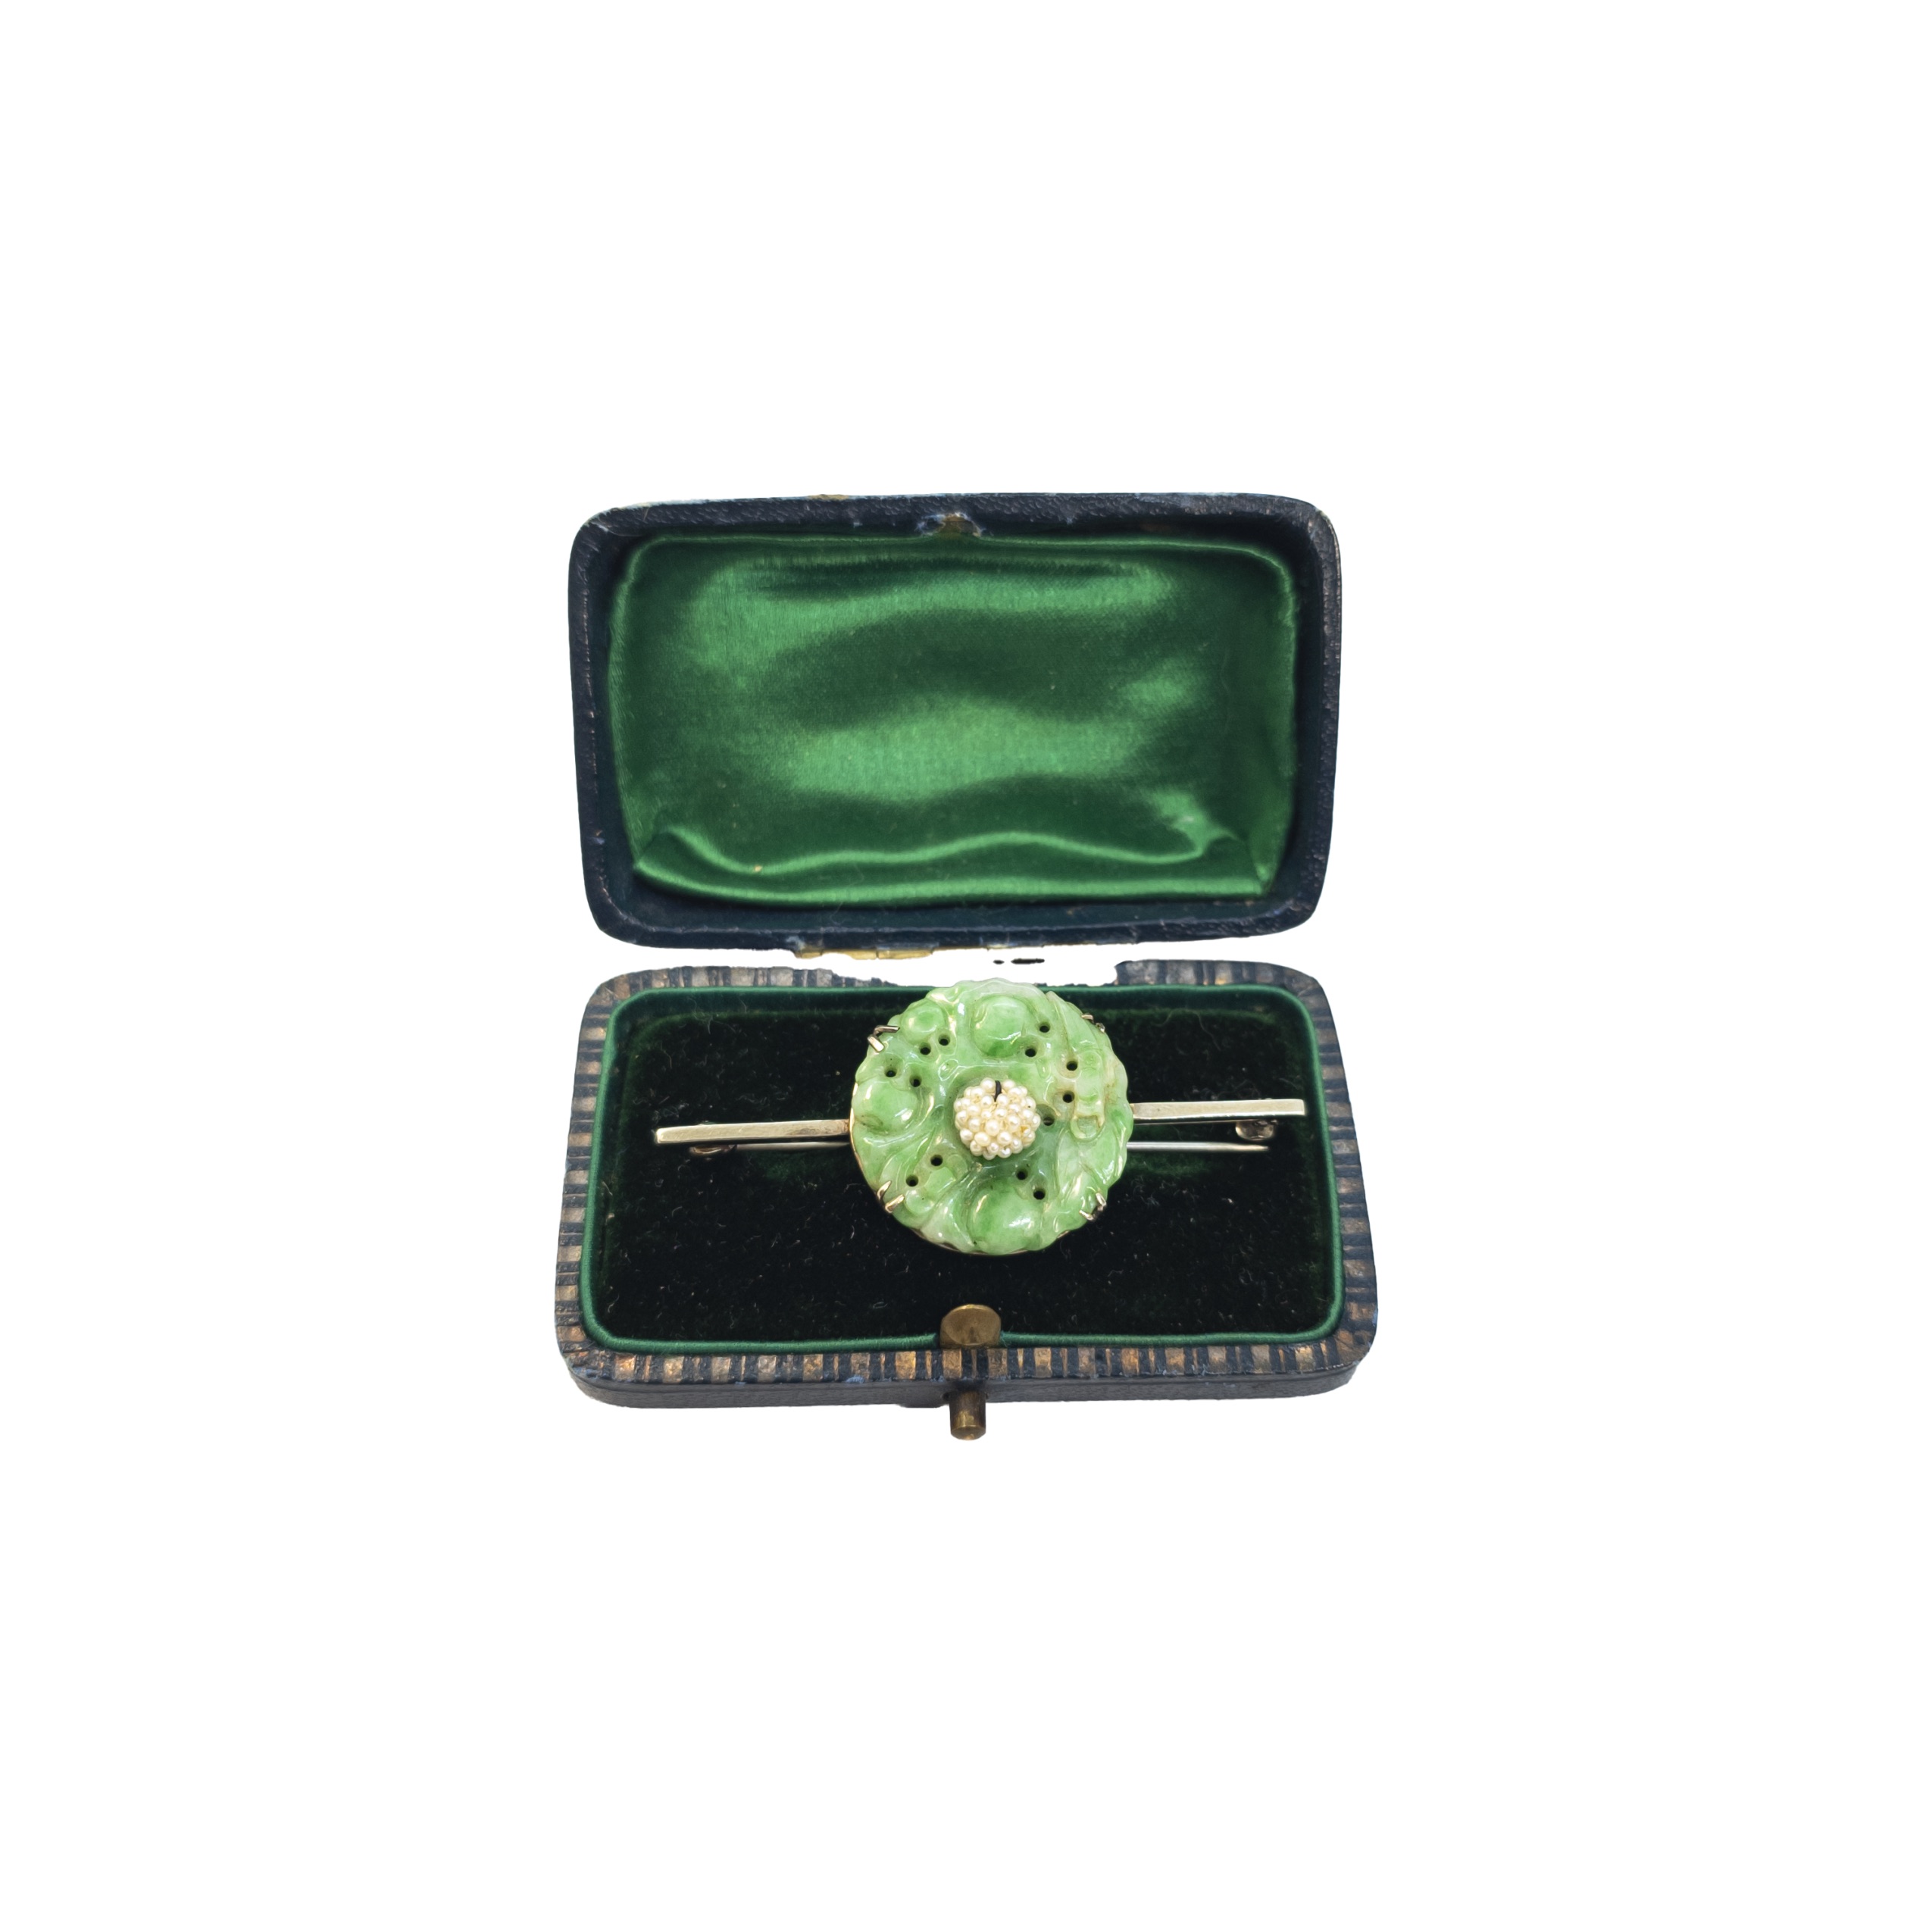 Chinese, Circa 1910, A jadeite and seed pearl brooch